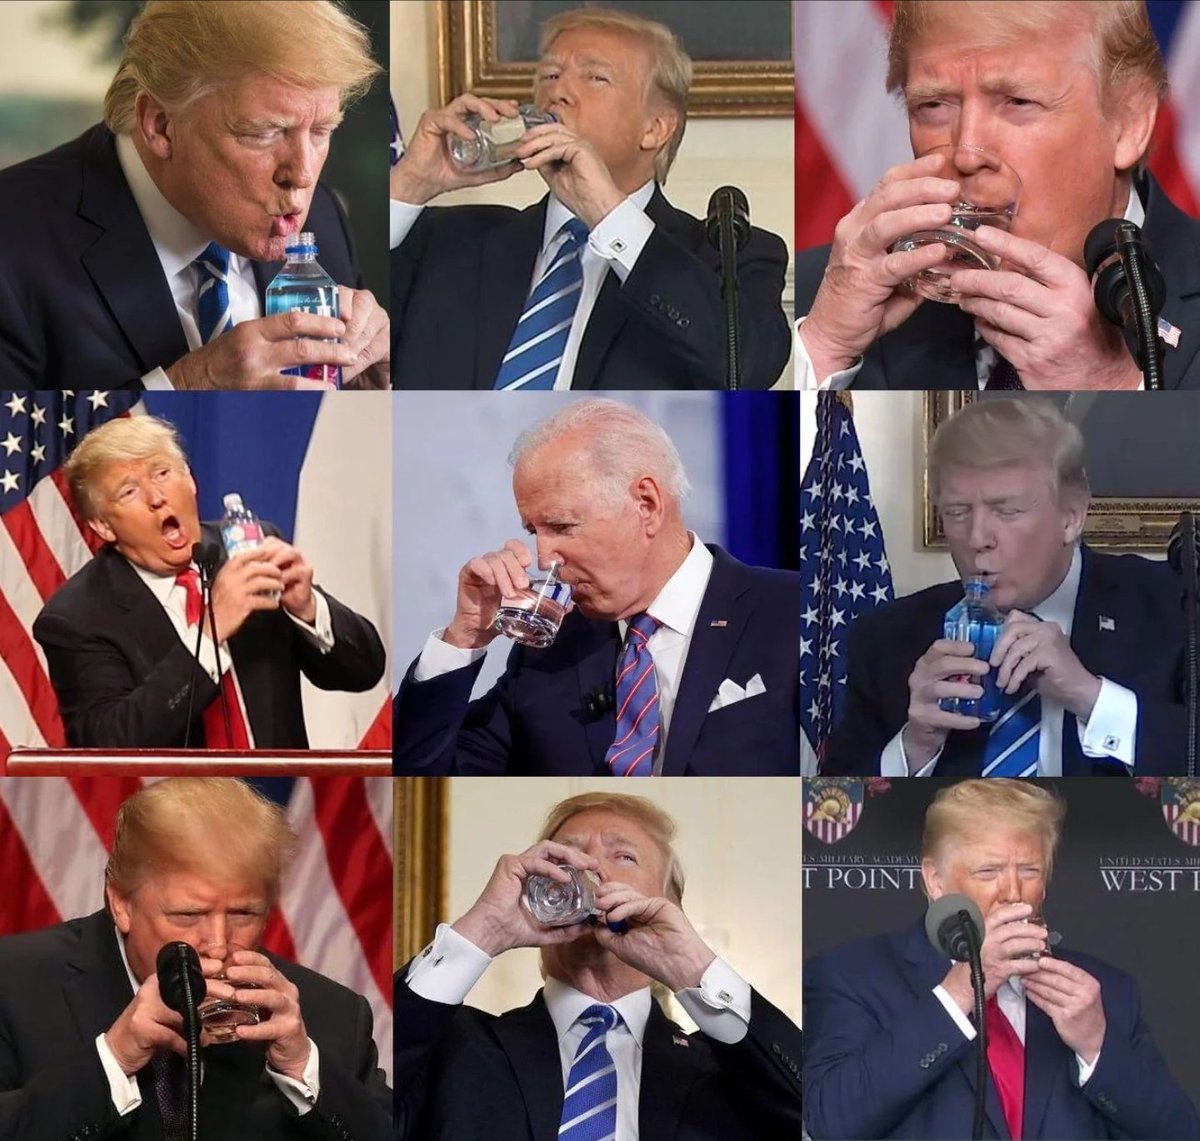 I prefer Presidents who can drink water with one hand.